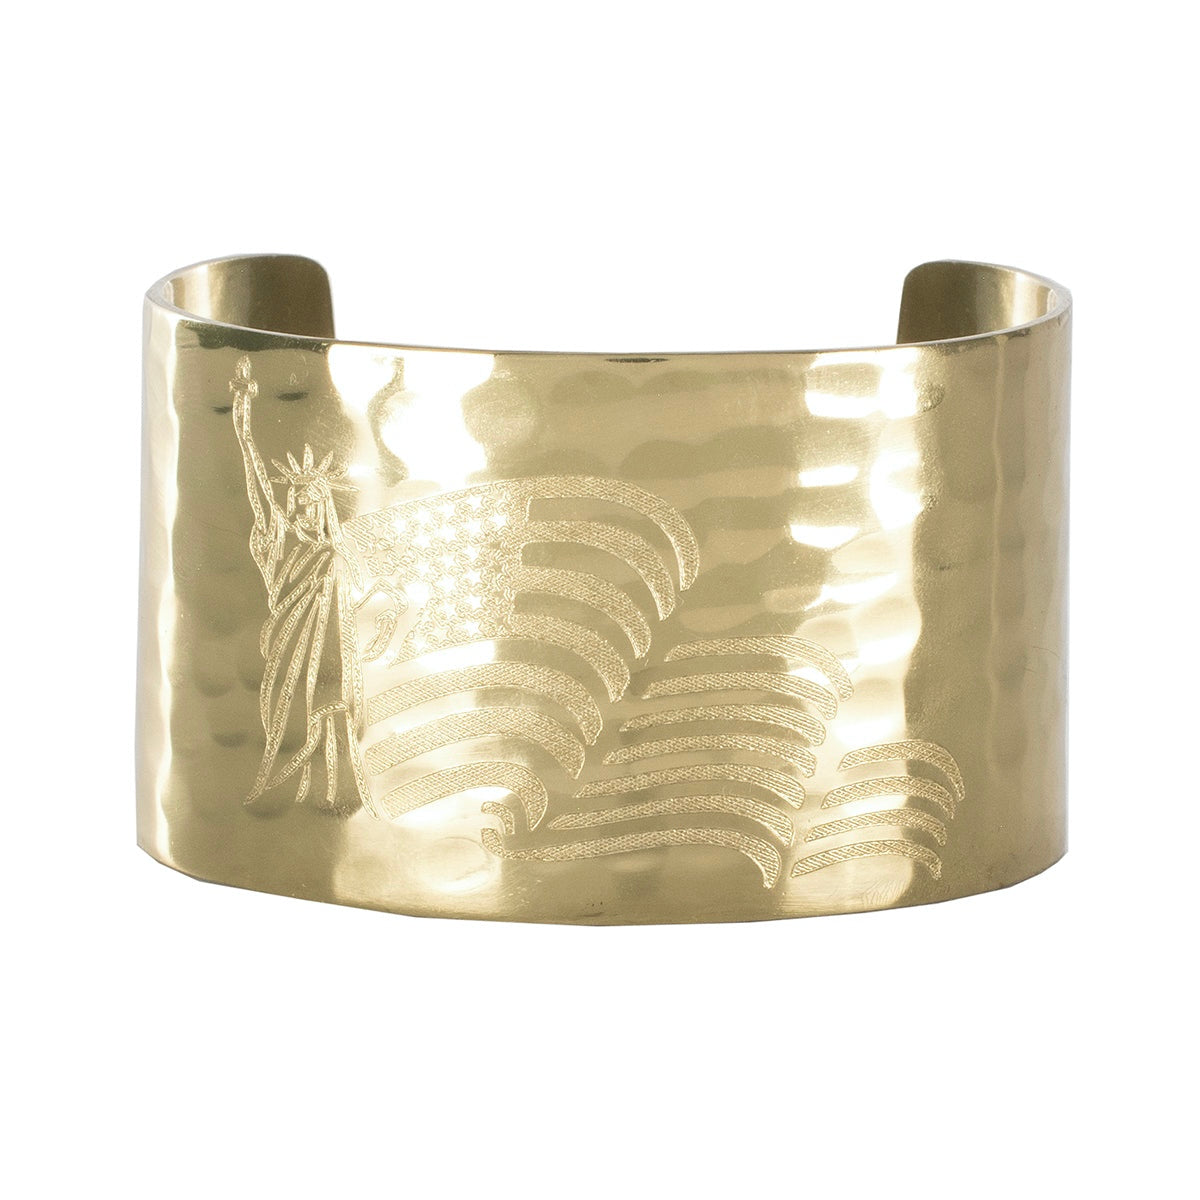 ~Limited Edition 1.5" Engraved Statue of Liberty & Flag Cuff - Gold